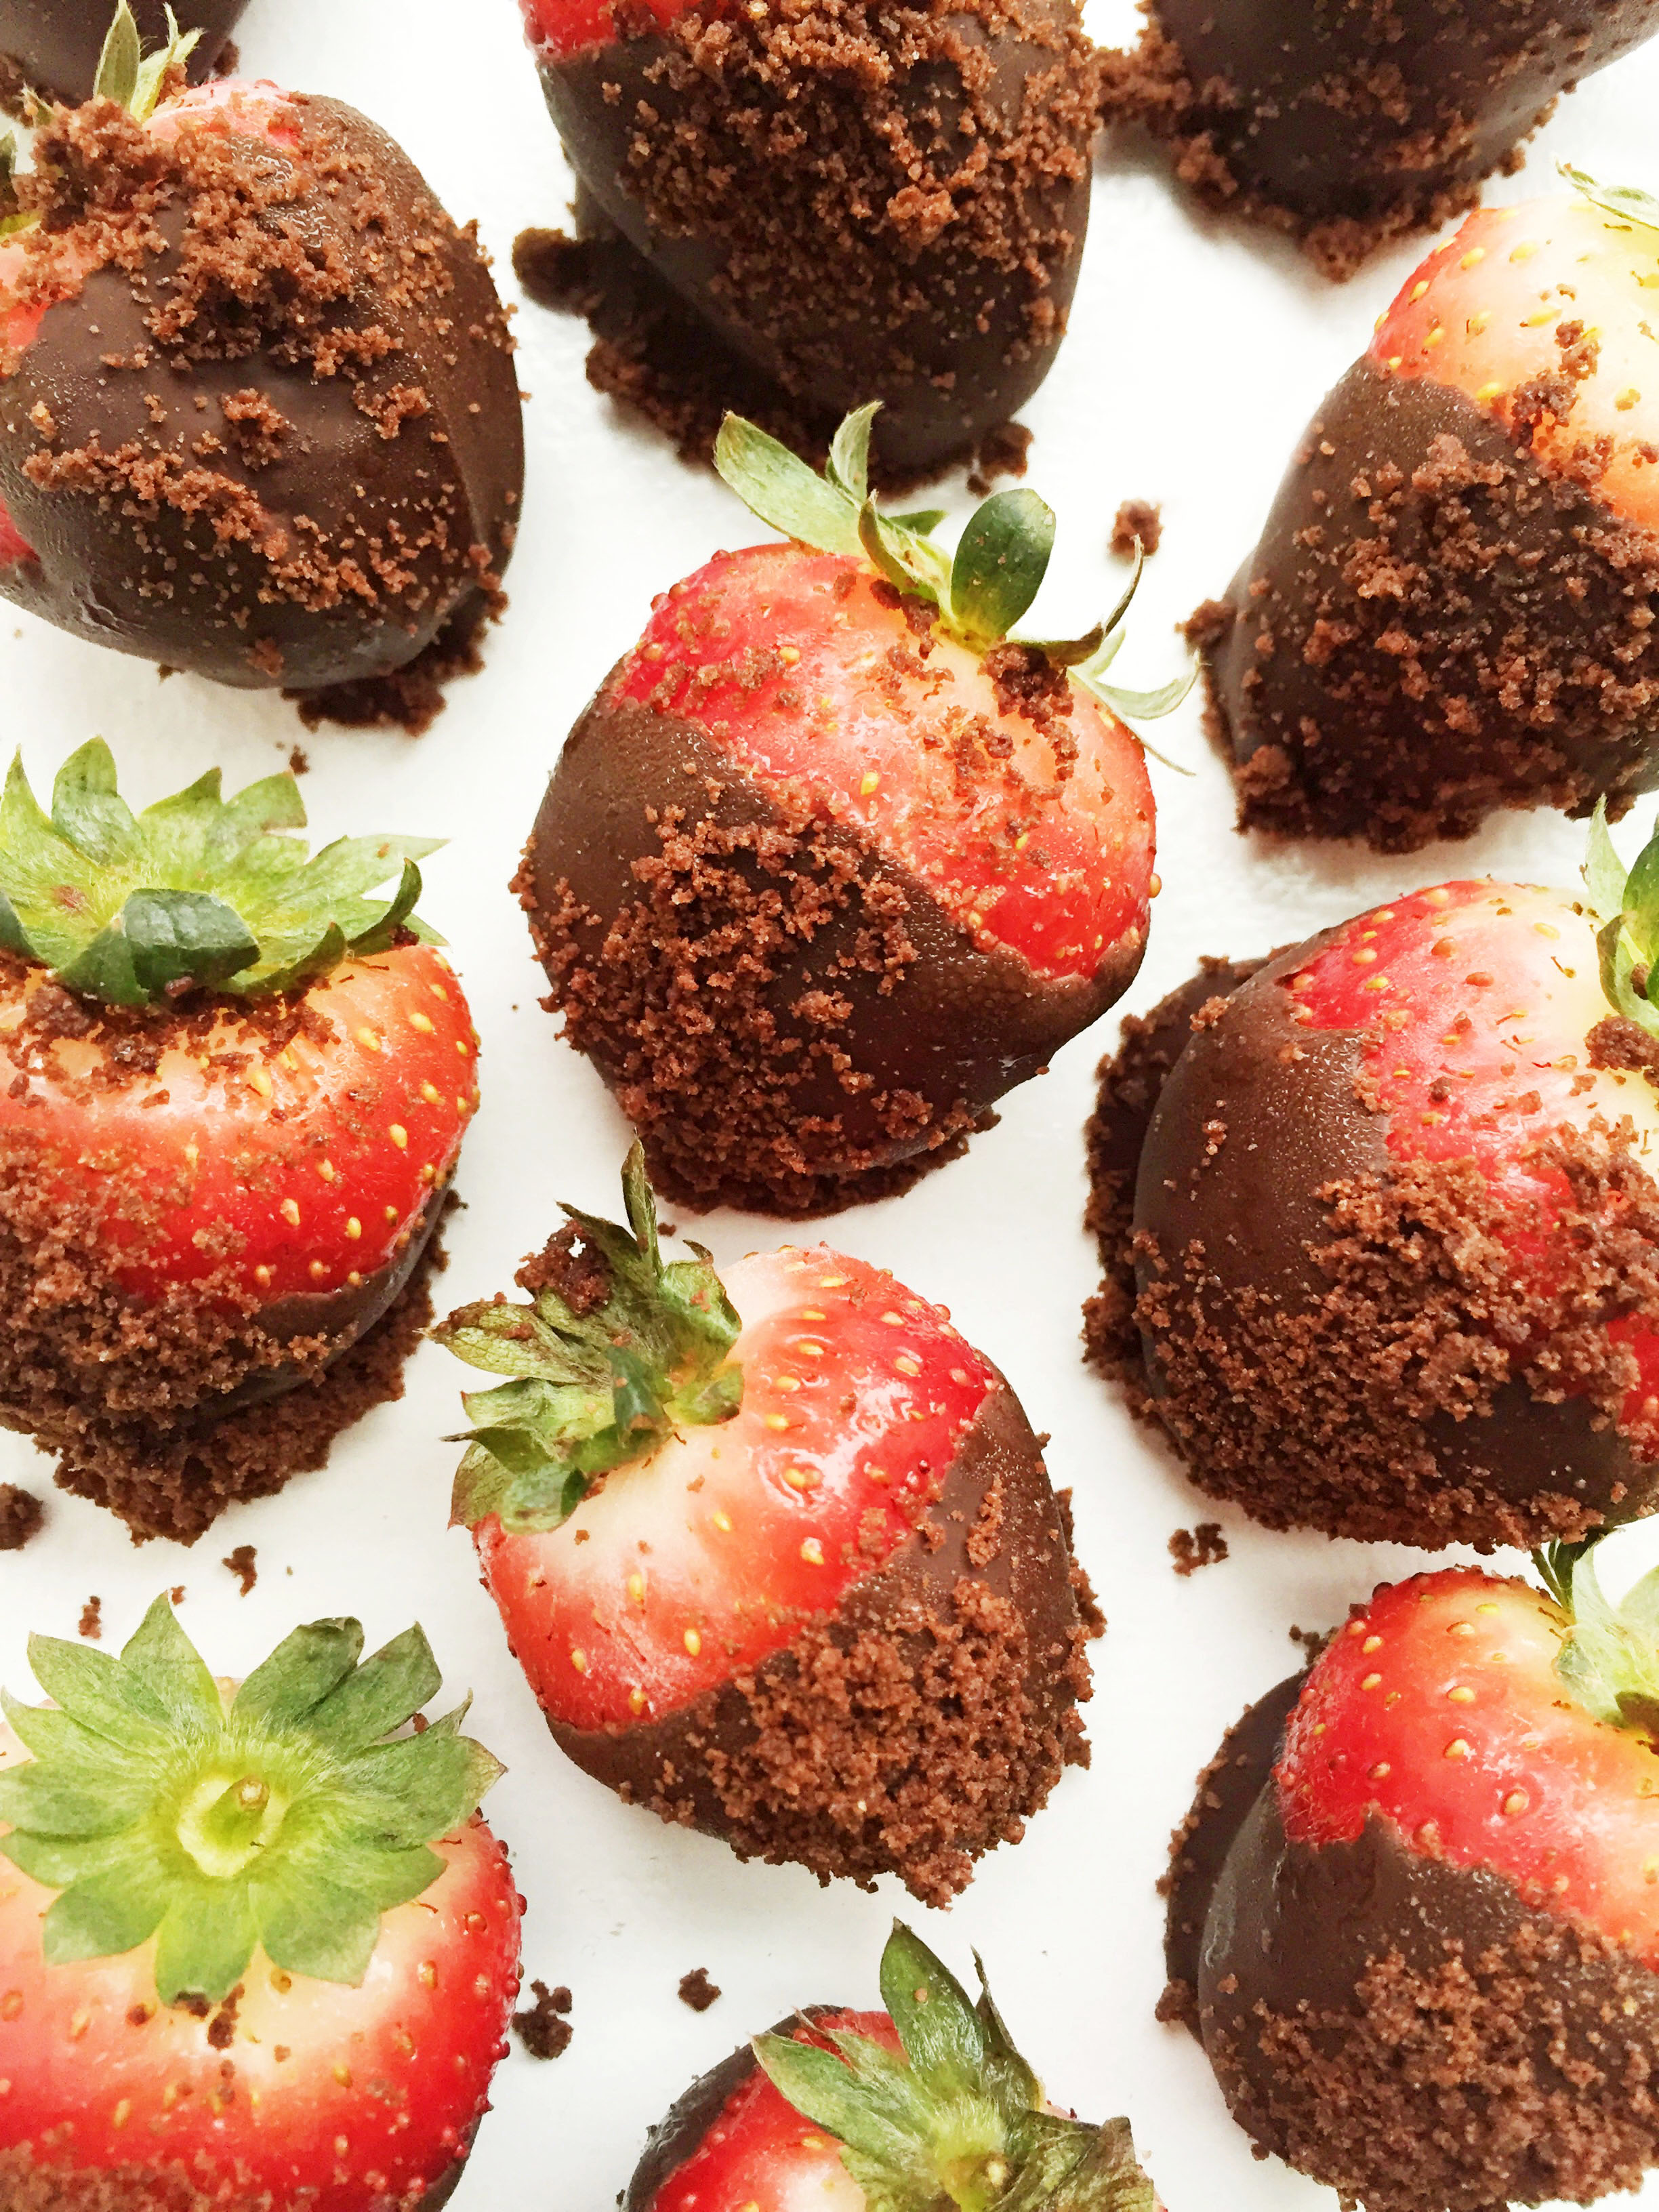 Gluten Free Cookie Dusted Dark Chocolate Covered Strawberries, the perfect indulgent yet healthy treat